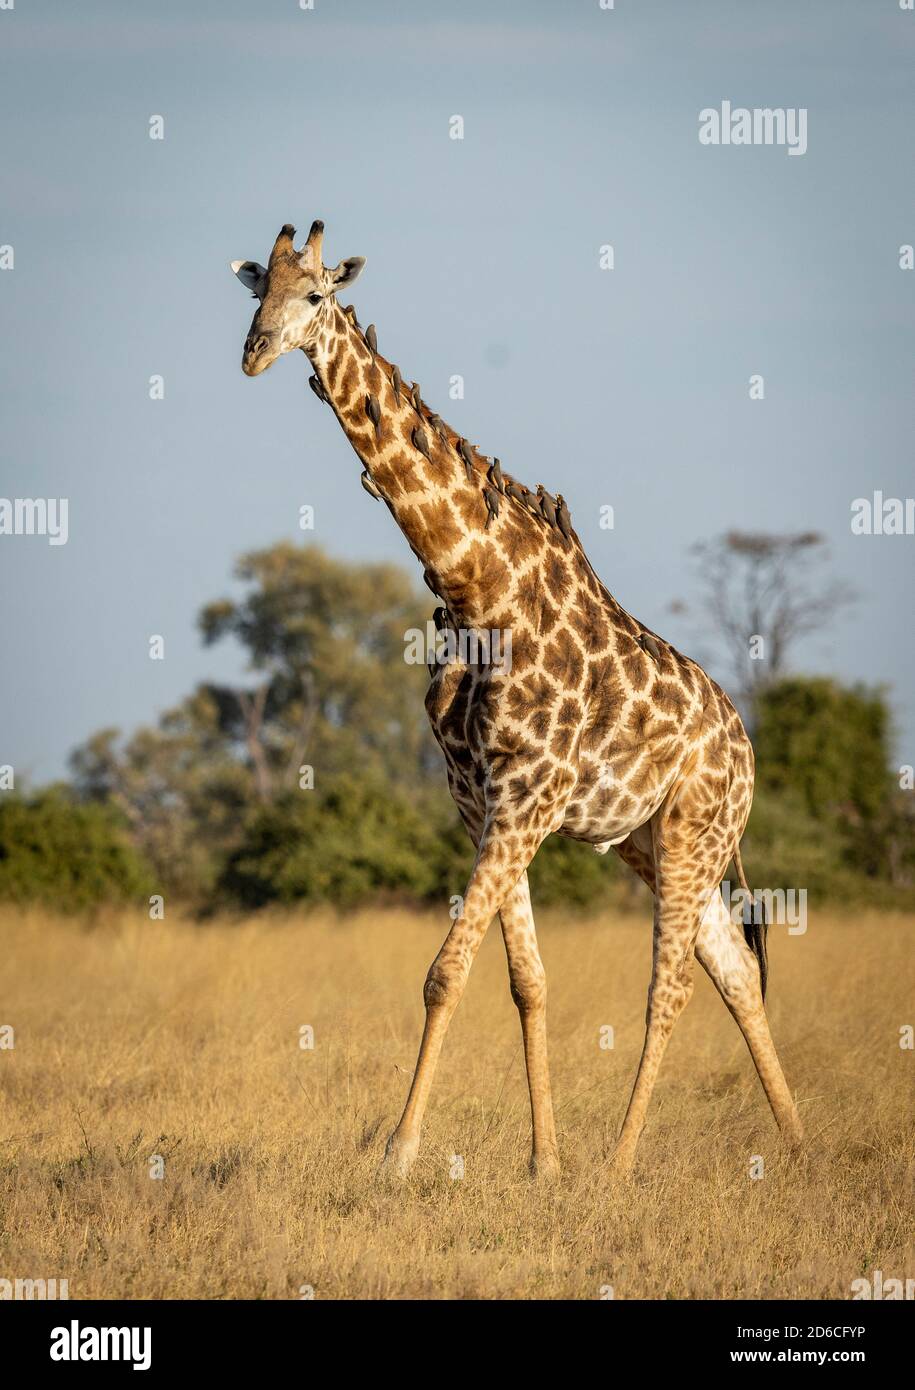 Vertical portrait of a male giraffe walking in dry grass with ox peckers on its neck with blue sky in the background in Savuti in Botswana Stock Photo